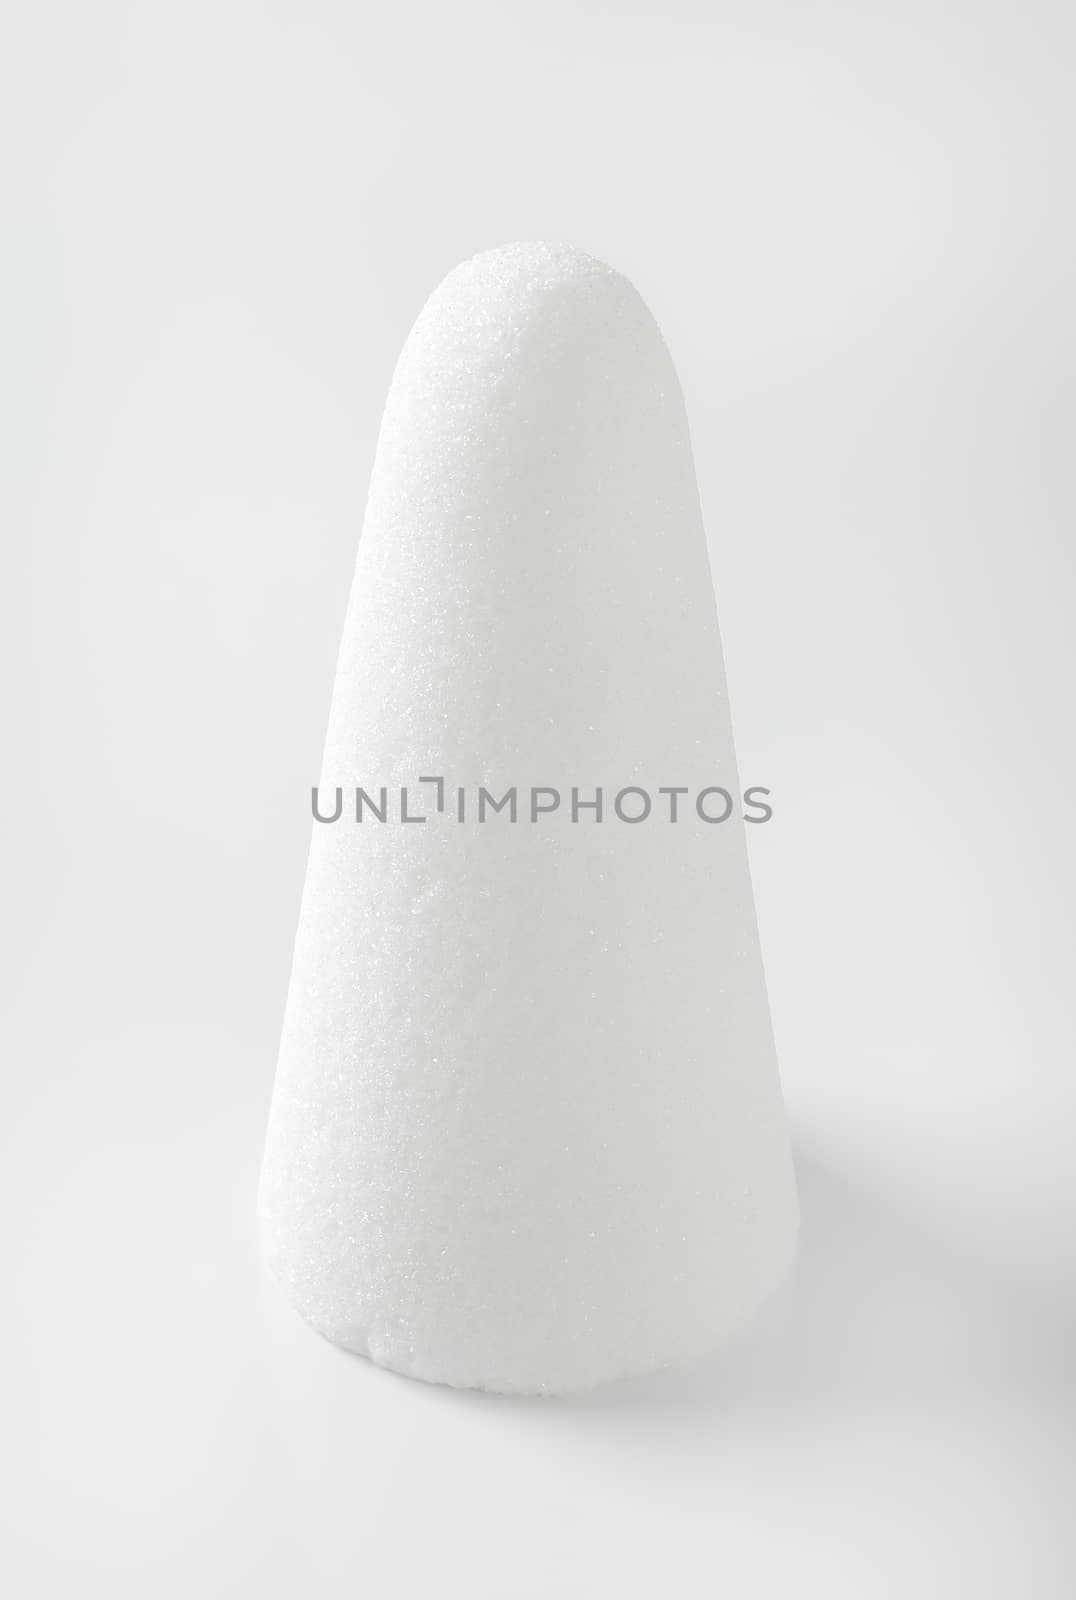 white sugar loaf or cone on white background